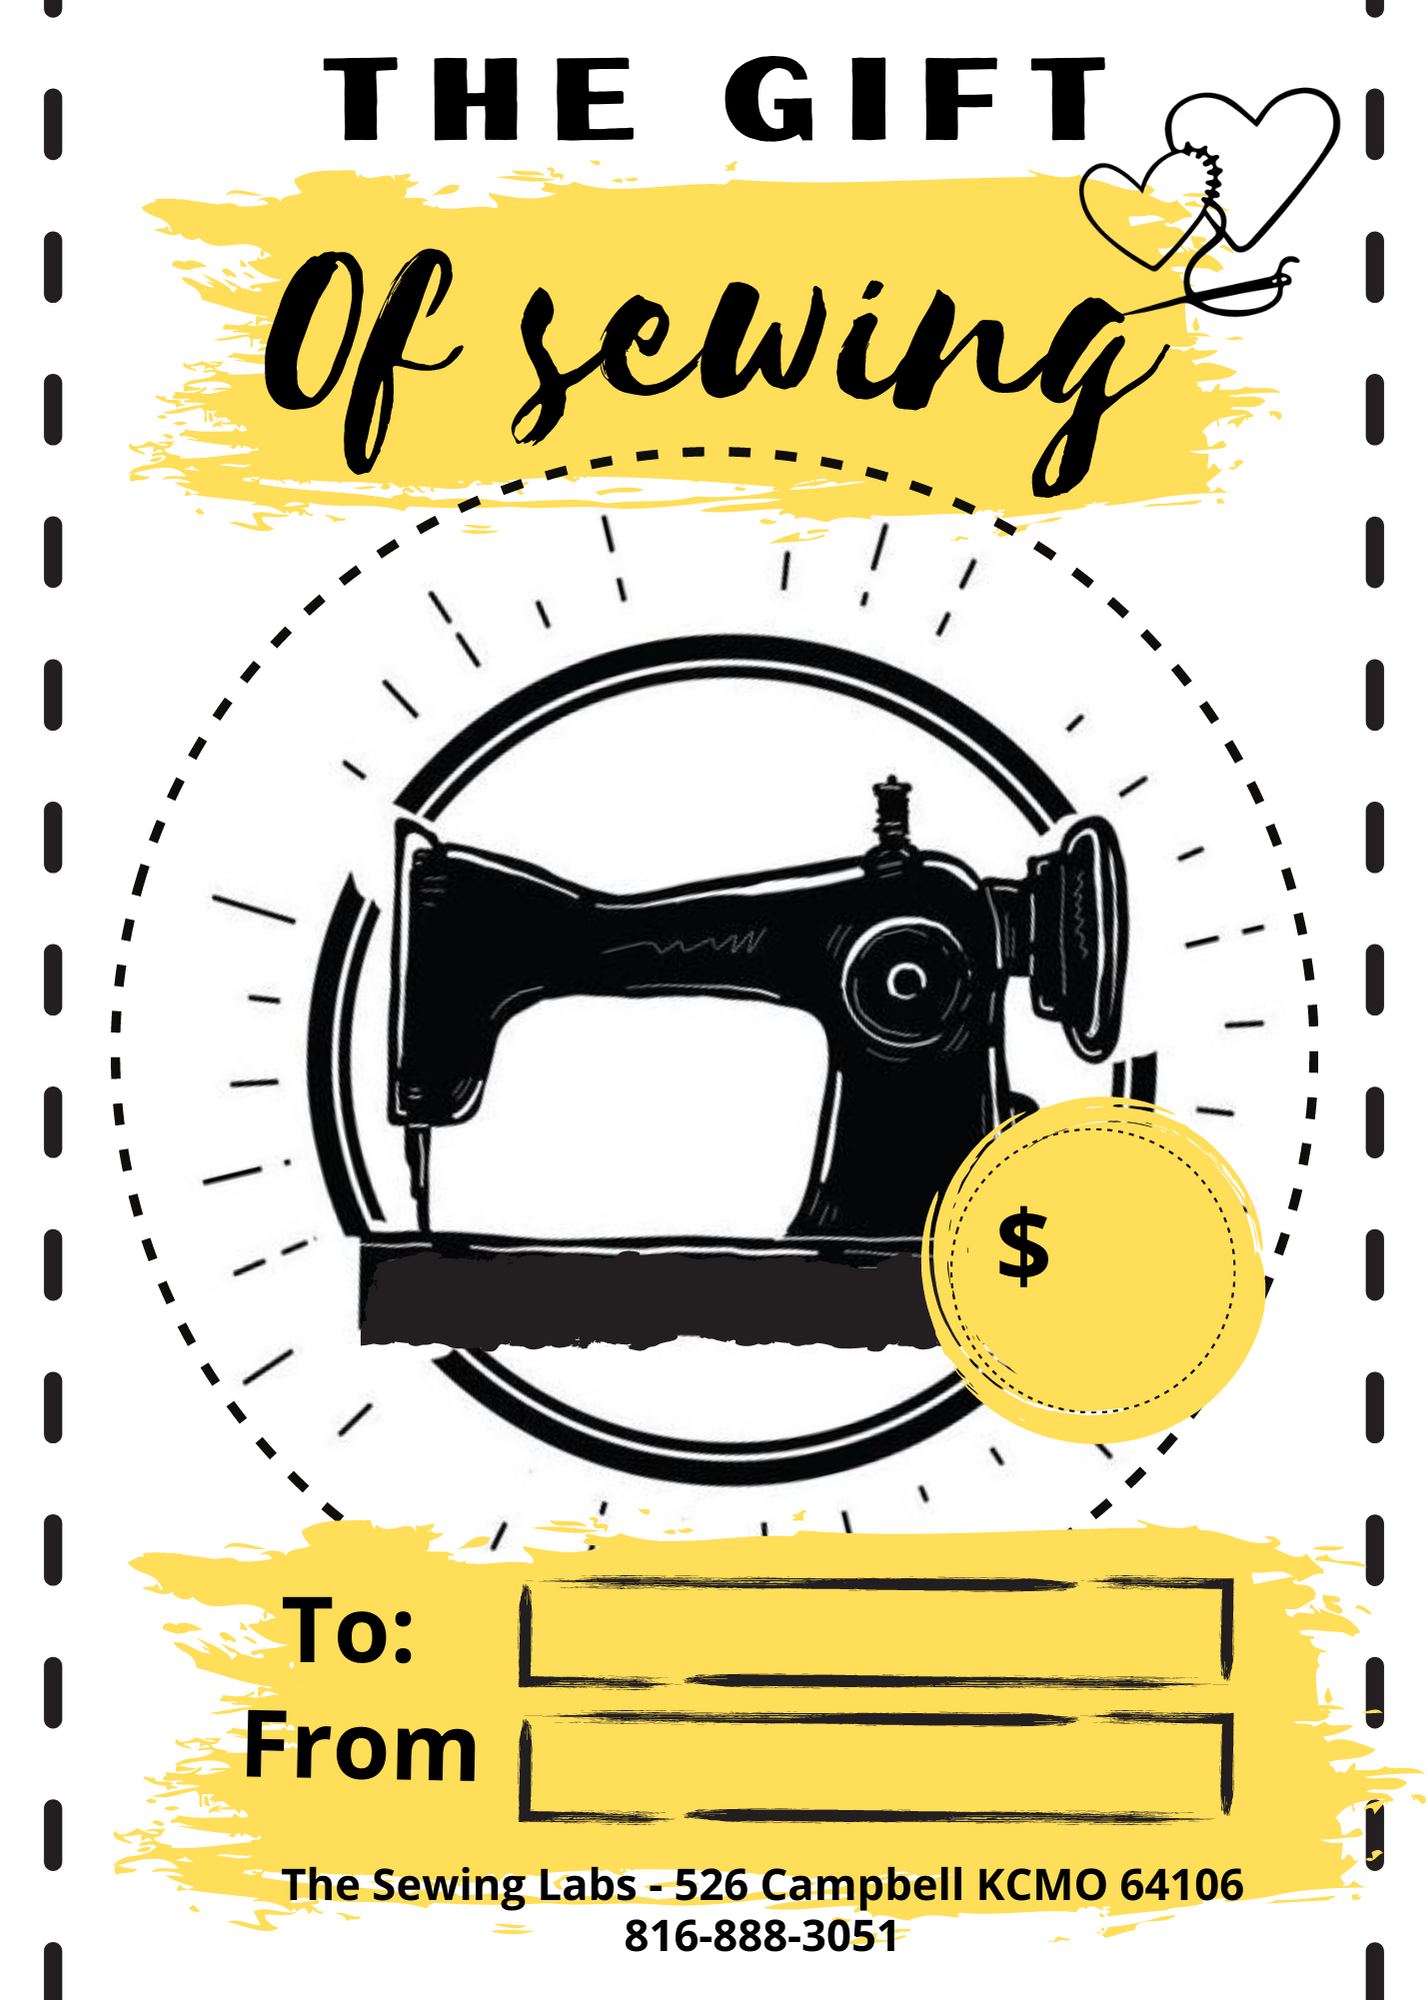 The Gift of Sewing - Gift Certificate - $30